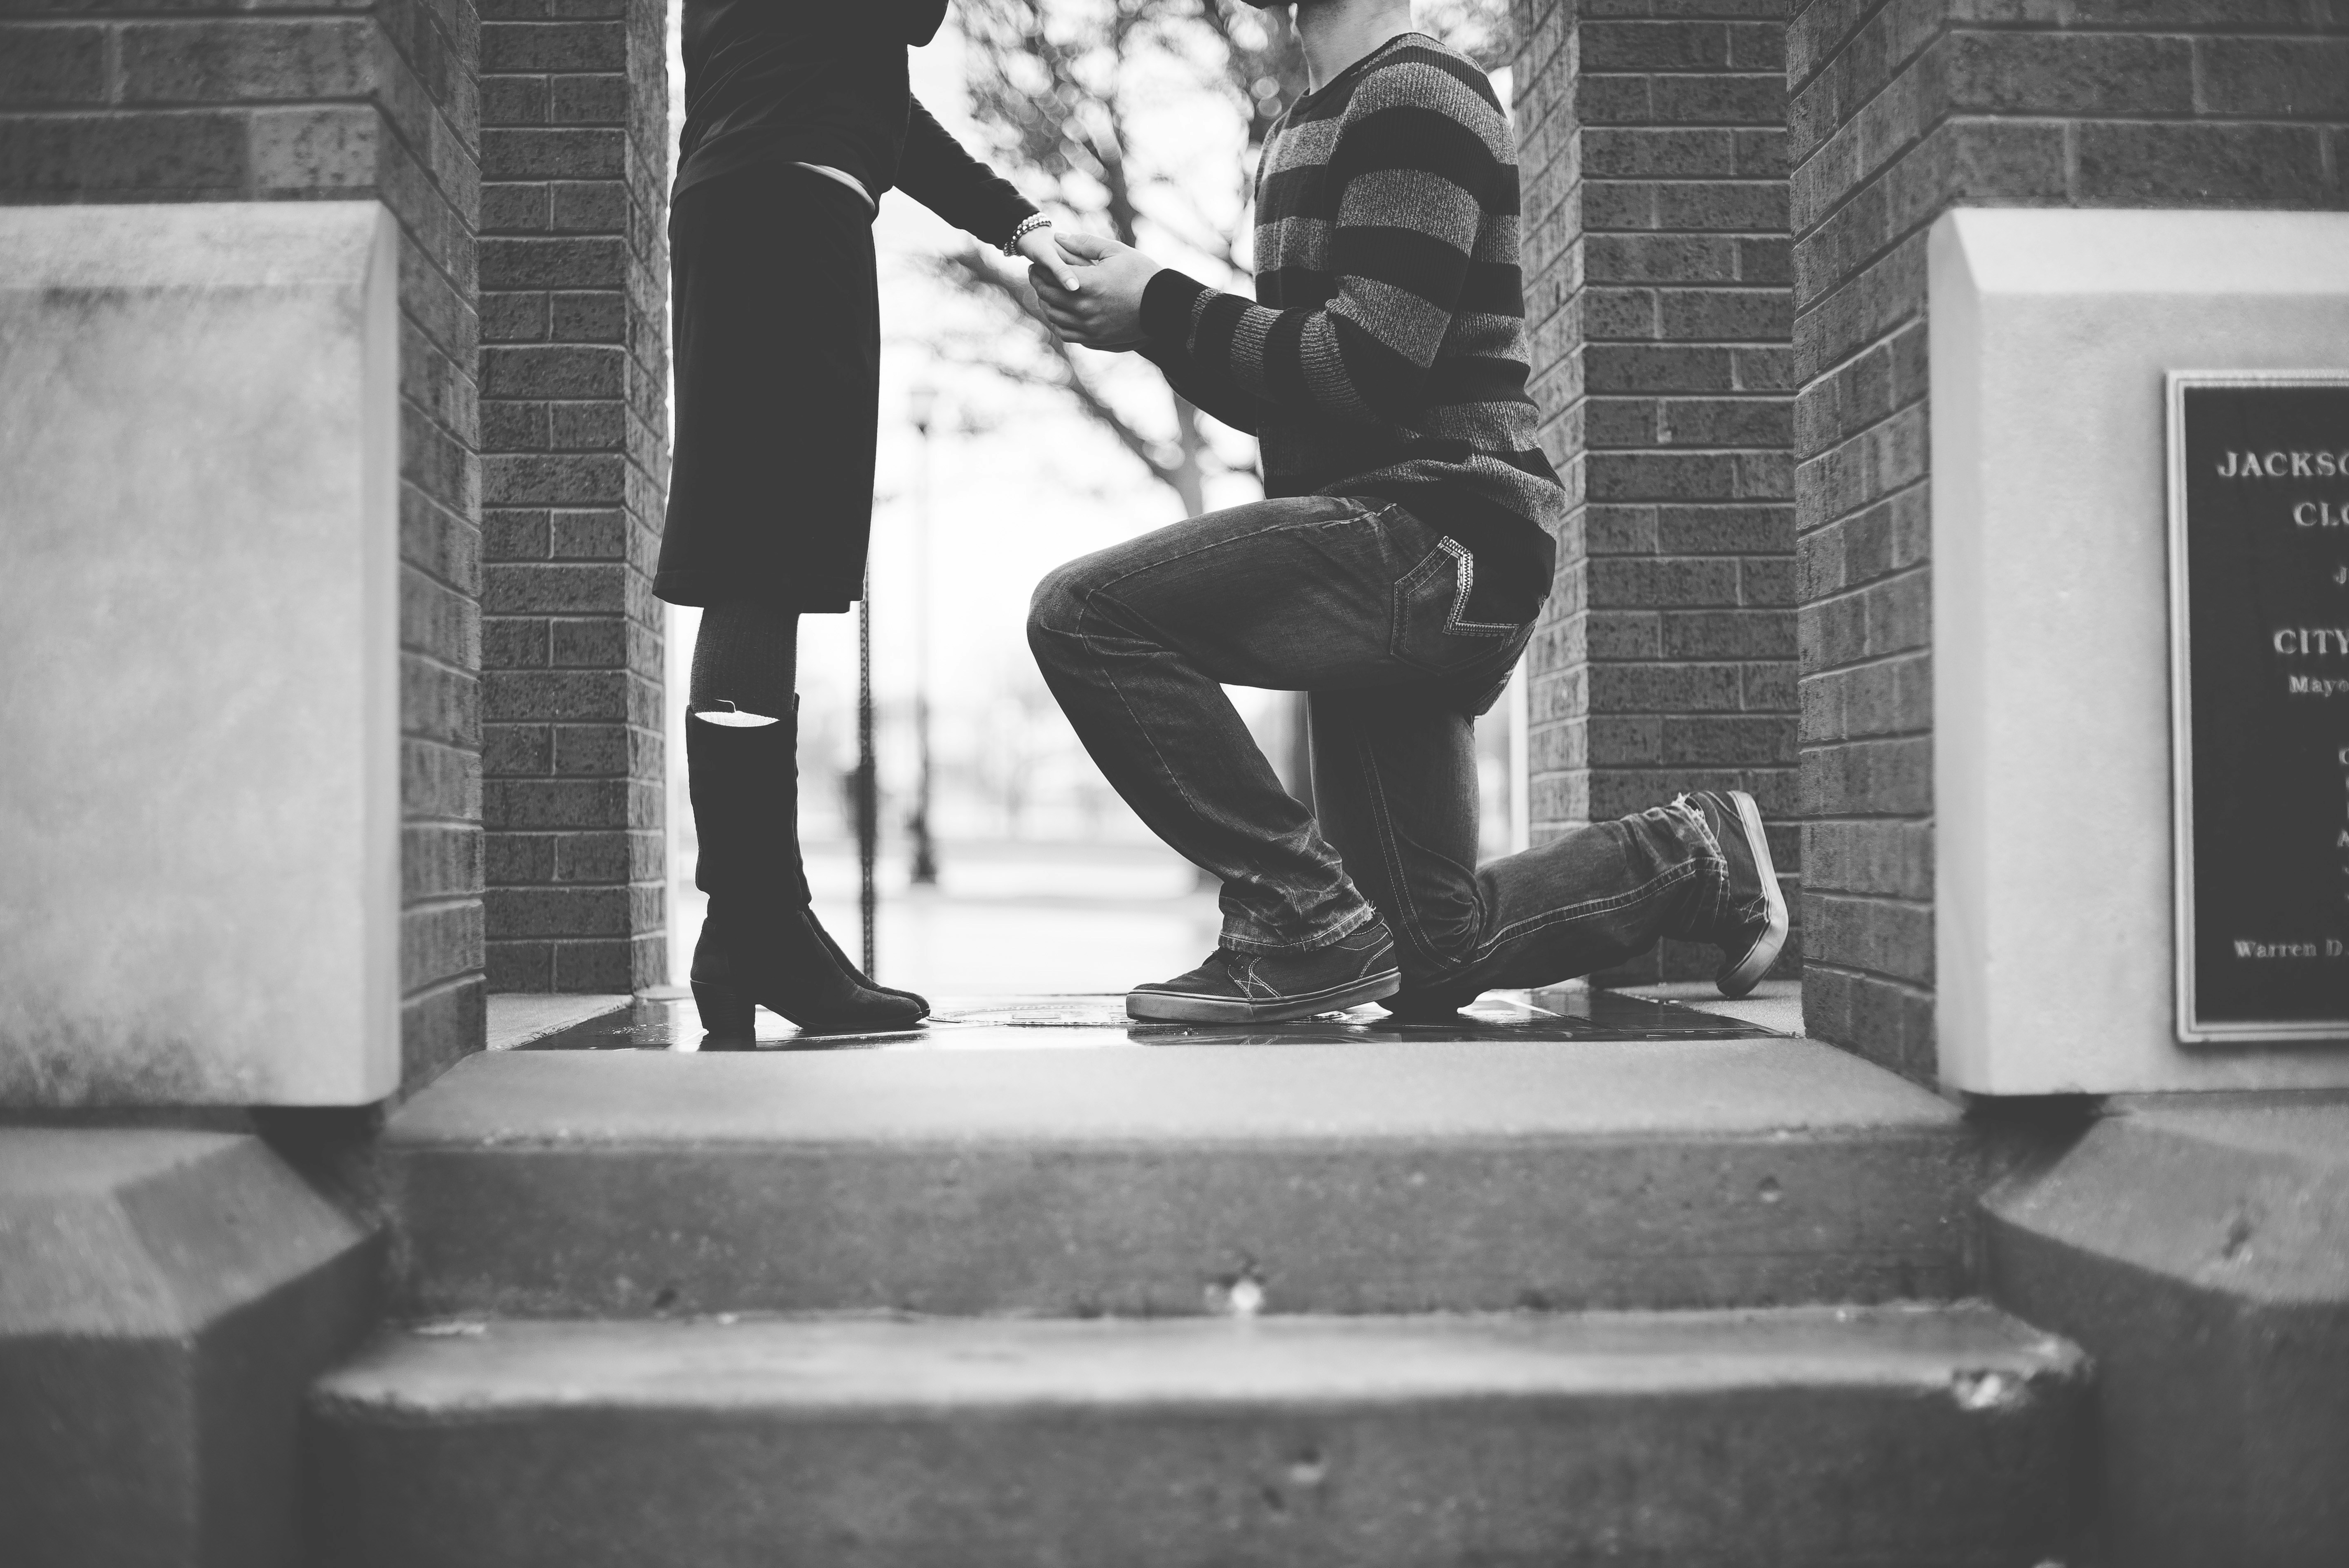 great photo recipe,how to photograph i was privileged to capture the special moment of my brother asking his girlfriend to marry him. it was underneath an old clock tower in the town where we live. my brother is a tough guy, but i’m pretty sure i saw a tear in his eye.; man kneeling in front of woman